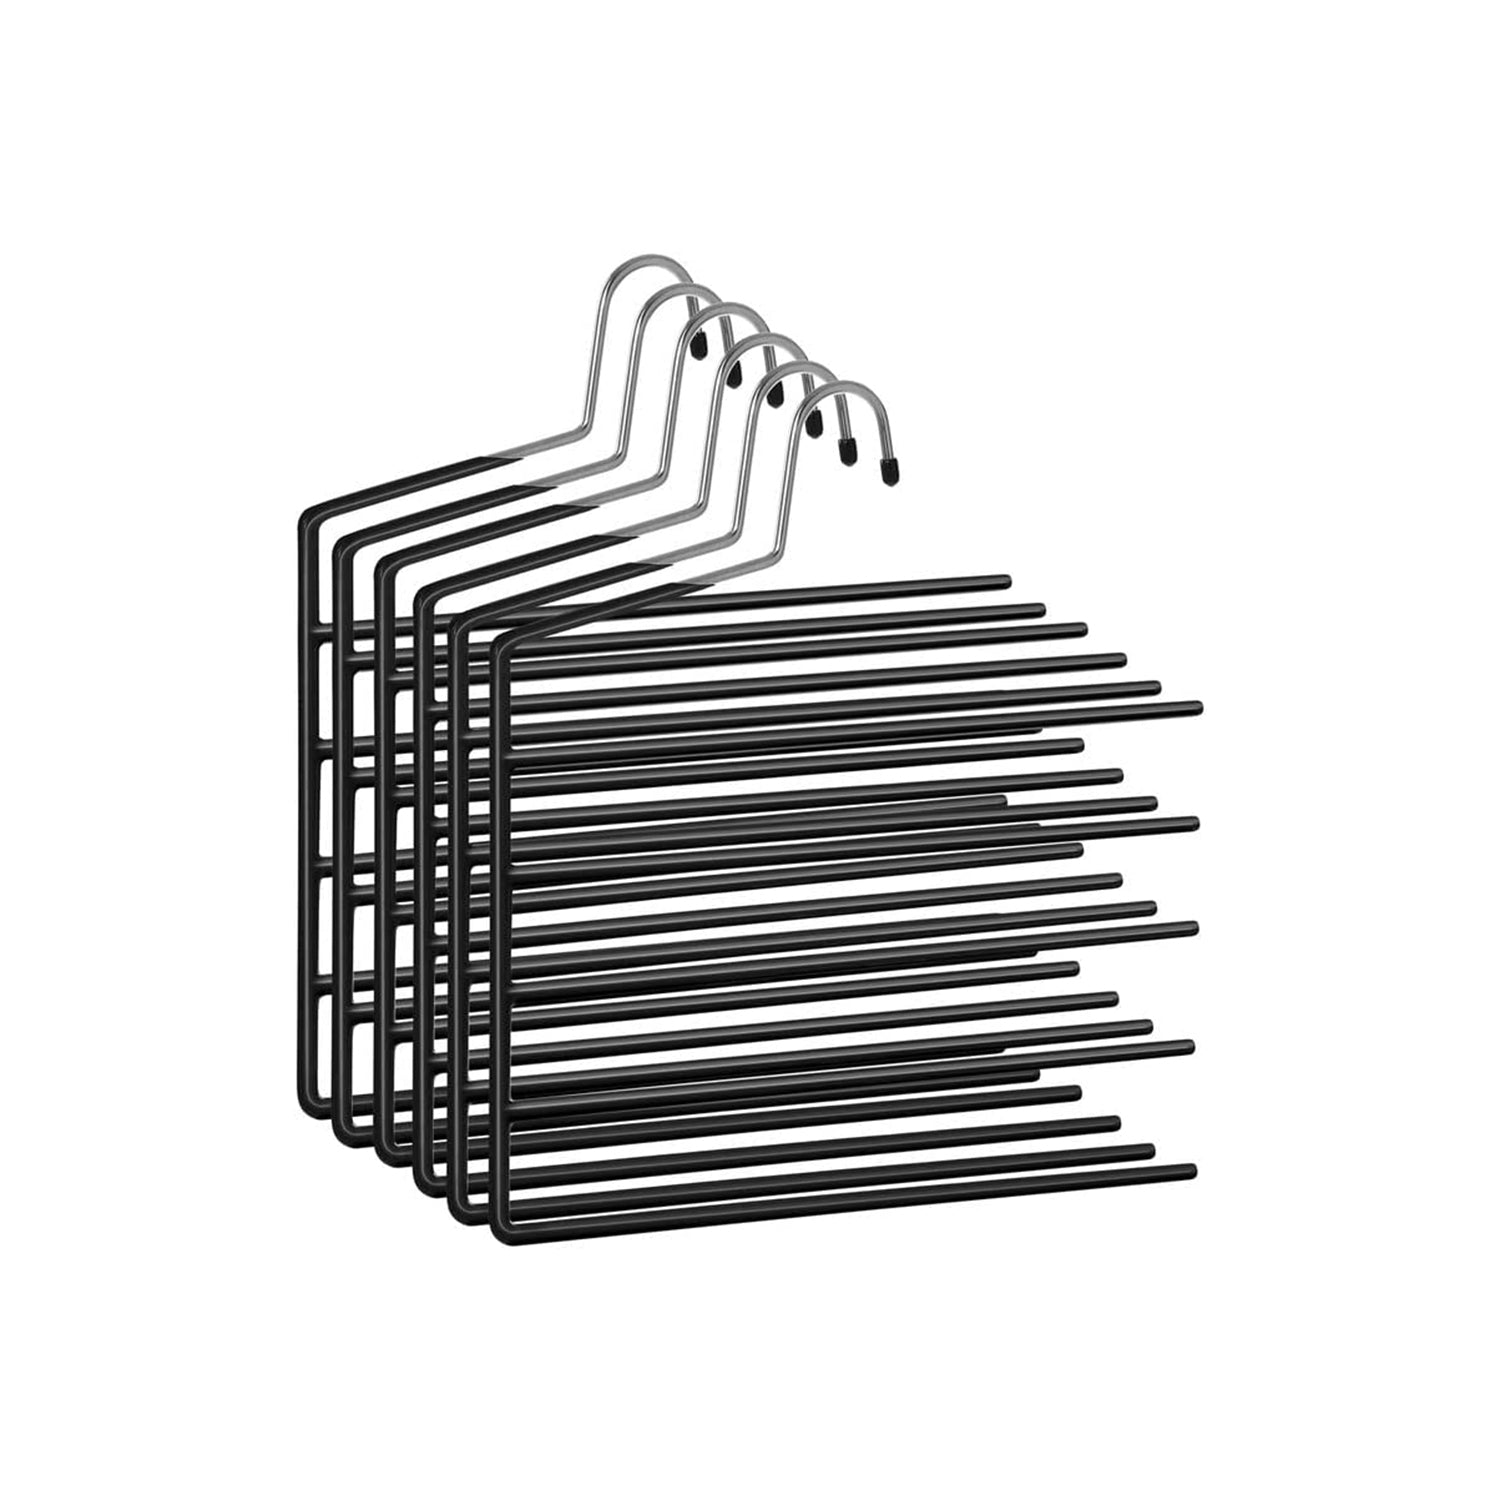 SONGMICS Open-Ended 5-Tier Clothes Hangers